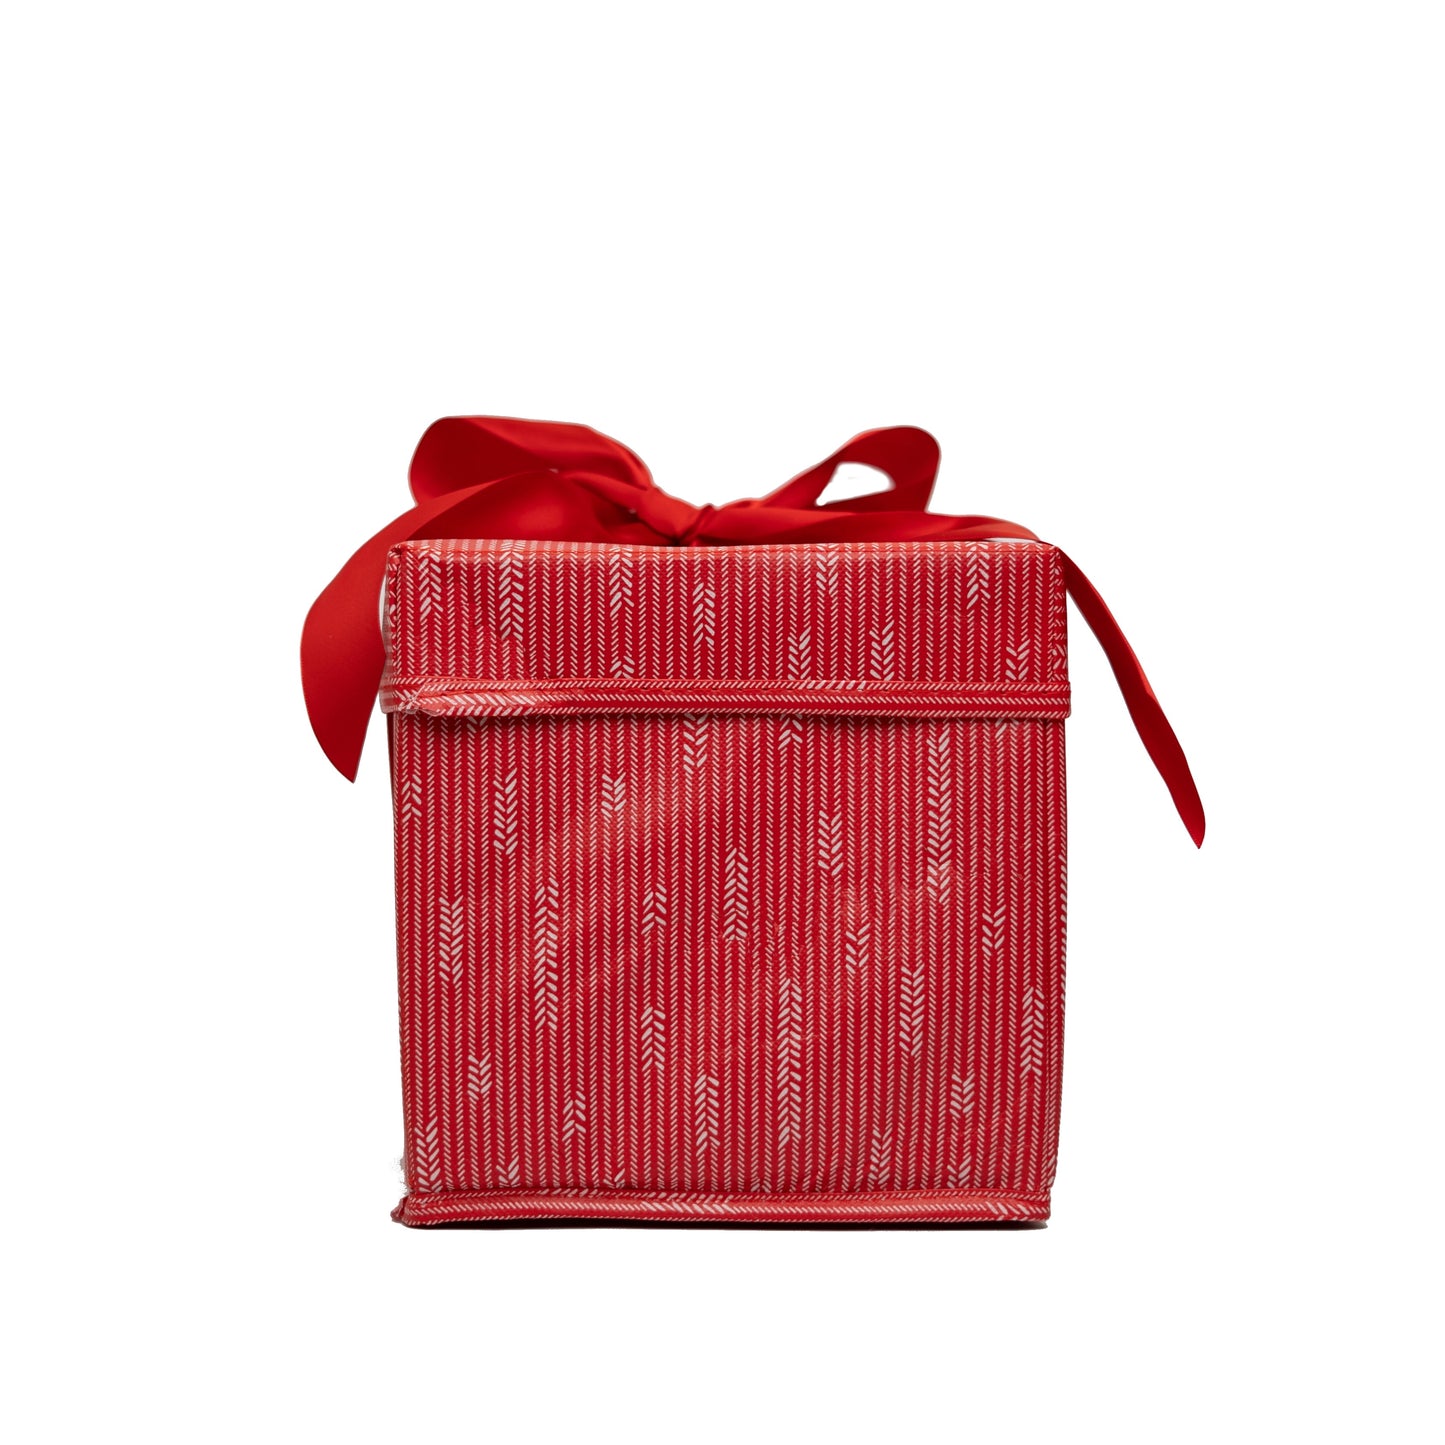 Small Red 8" Collapsible Gift Box with satin ribbon attached, great zero waste solution for sustainable and eco-friendly gift boxes - EverWrap